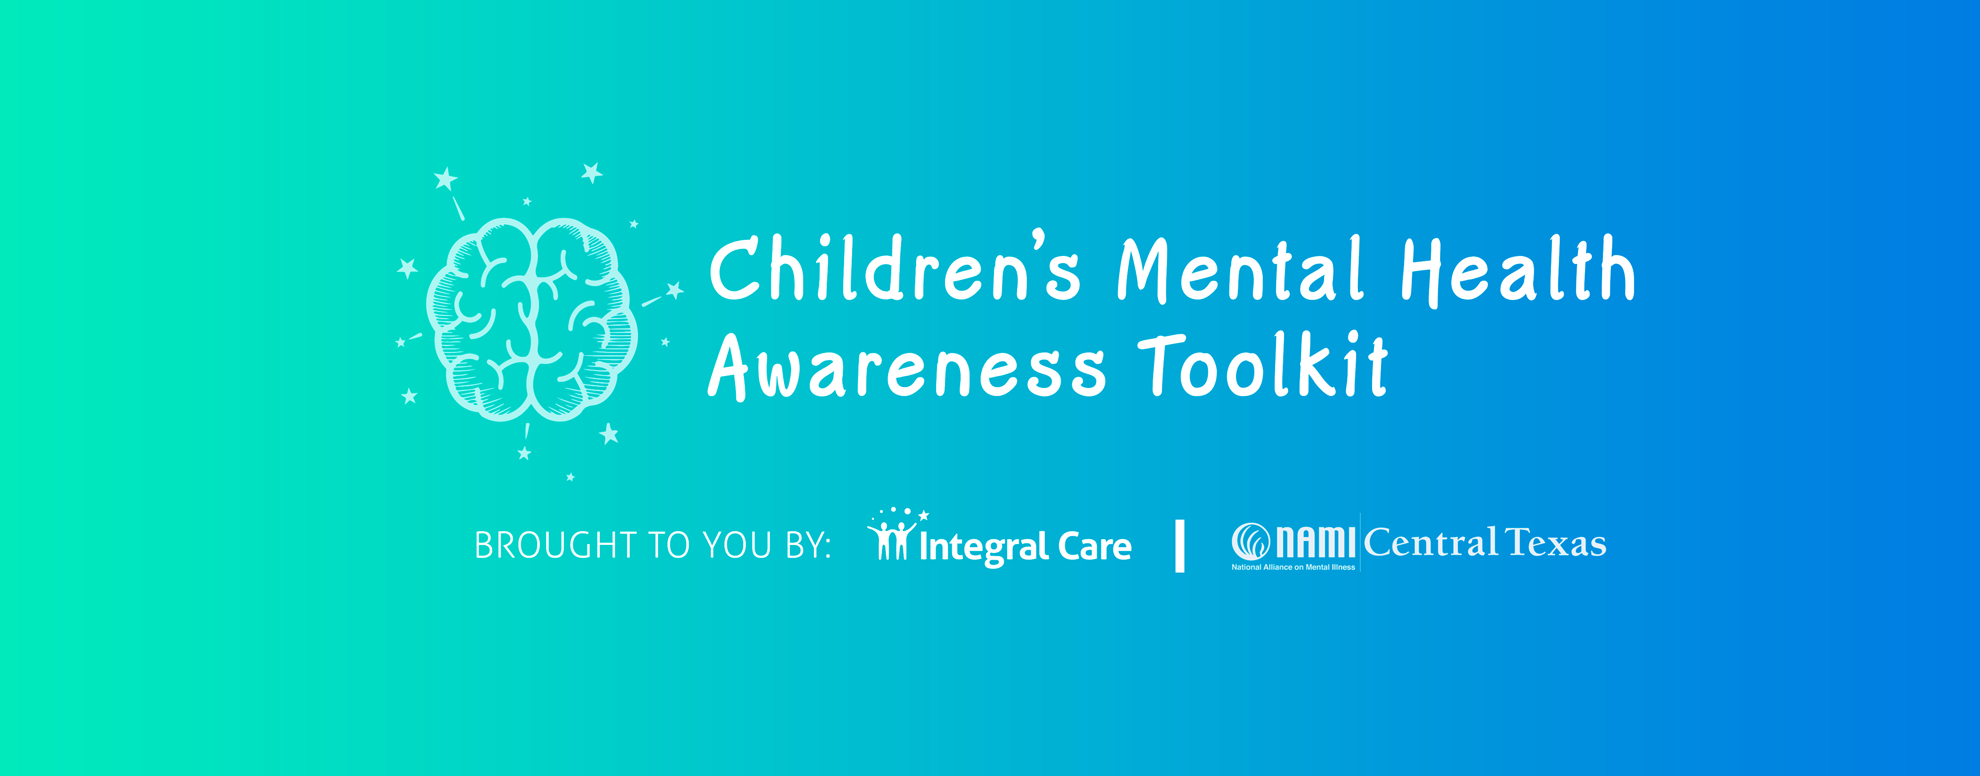 Blue and green banner with a brain icon reading Childrens mental health awareness toolkit